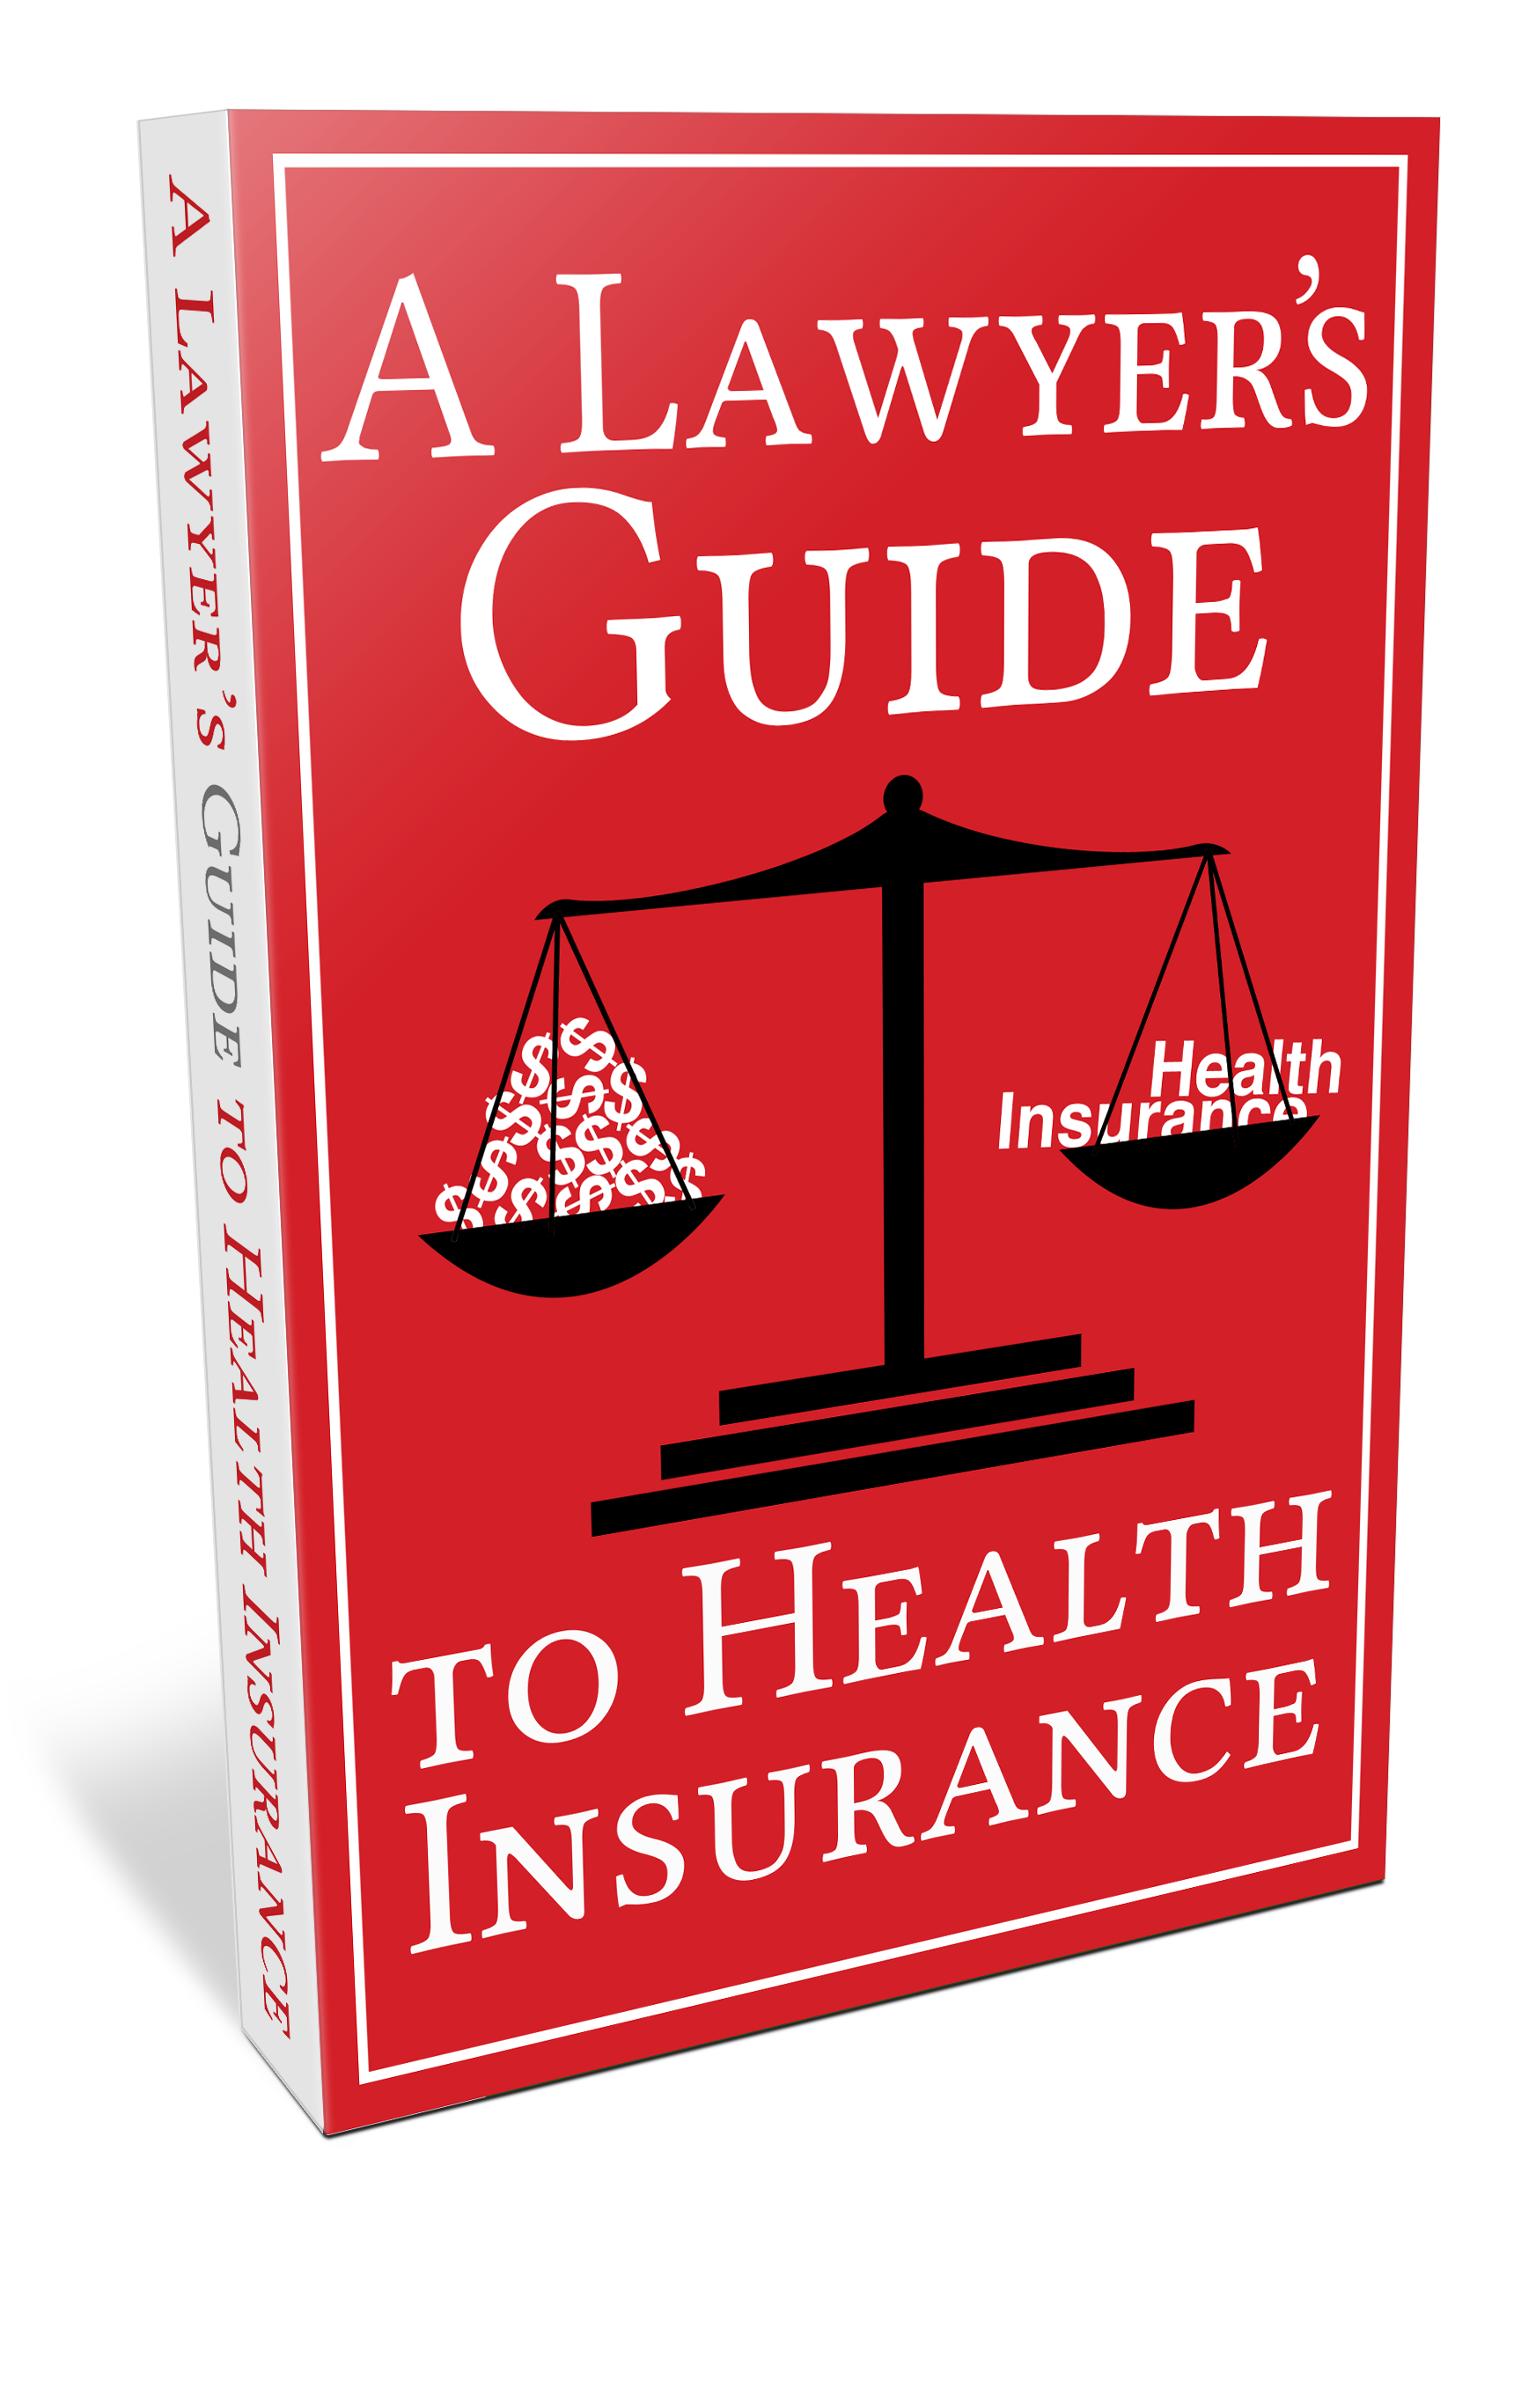 a lawyer's guide to health insurance book